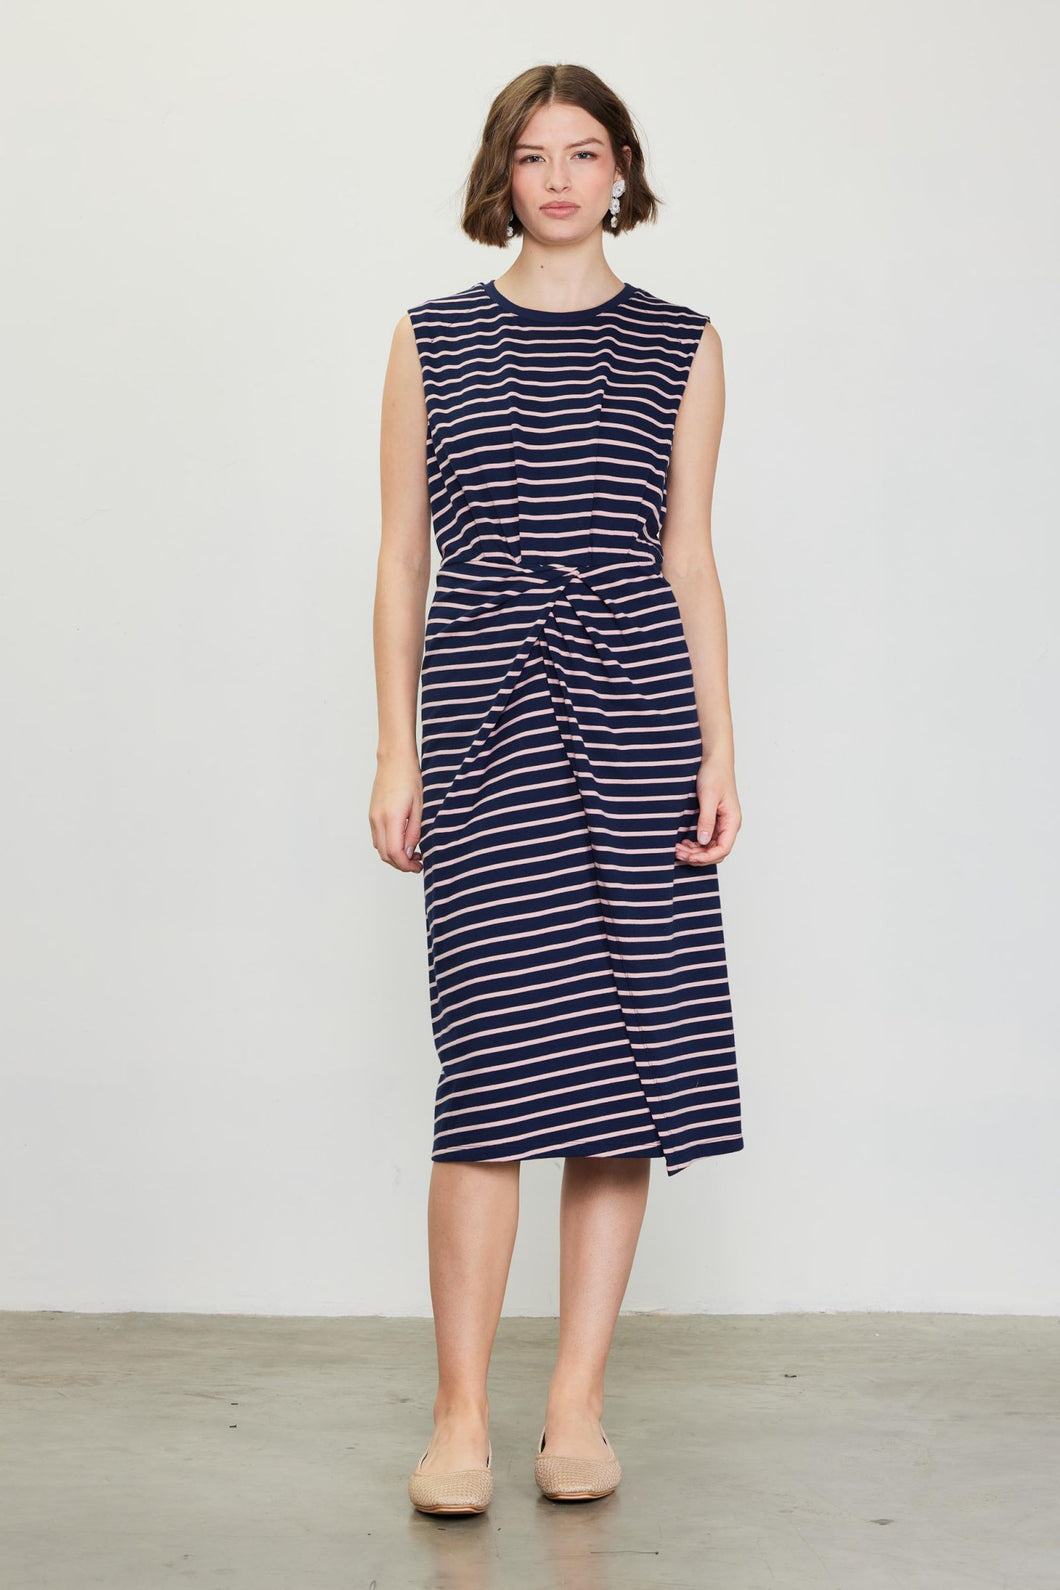 The Pink and Navy Stretson Knot Midi Dress